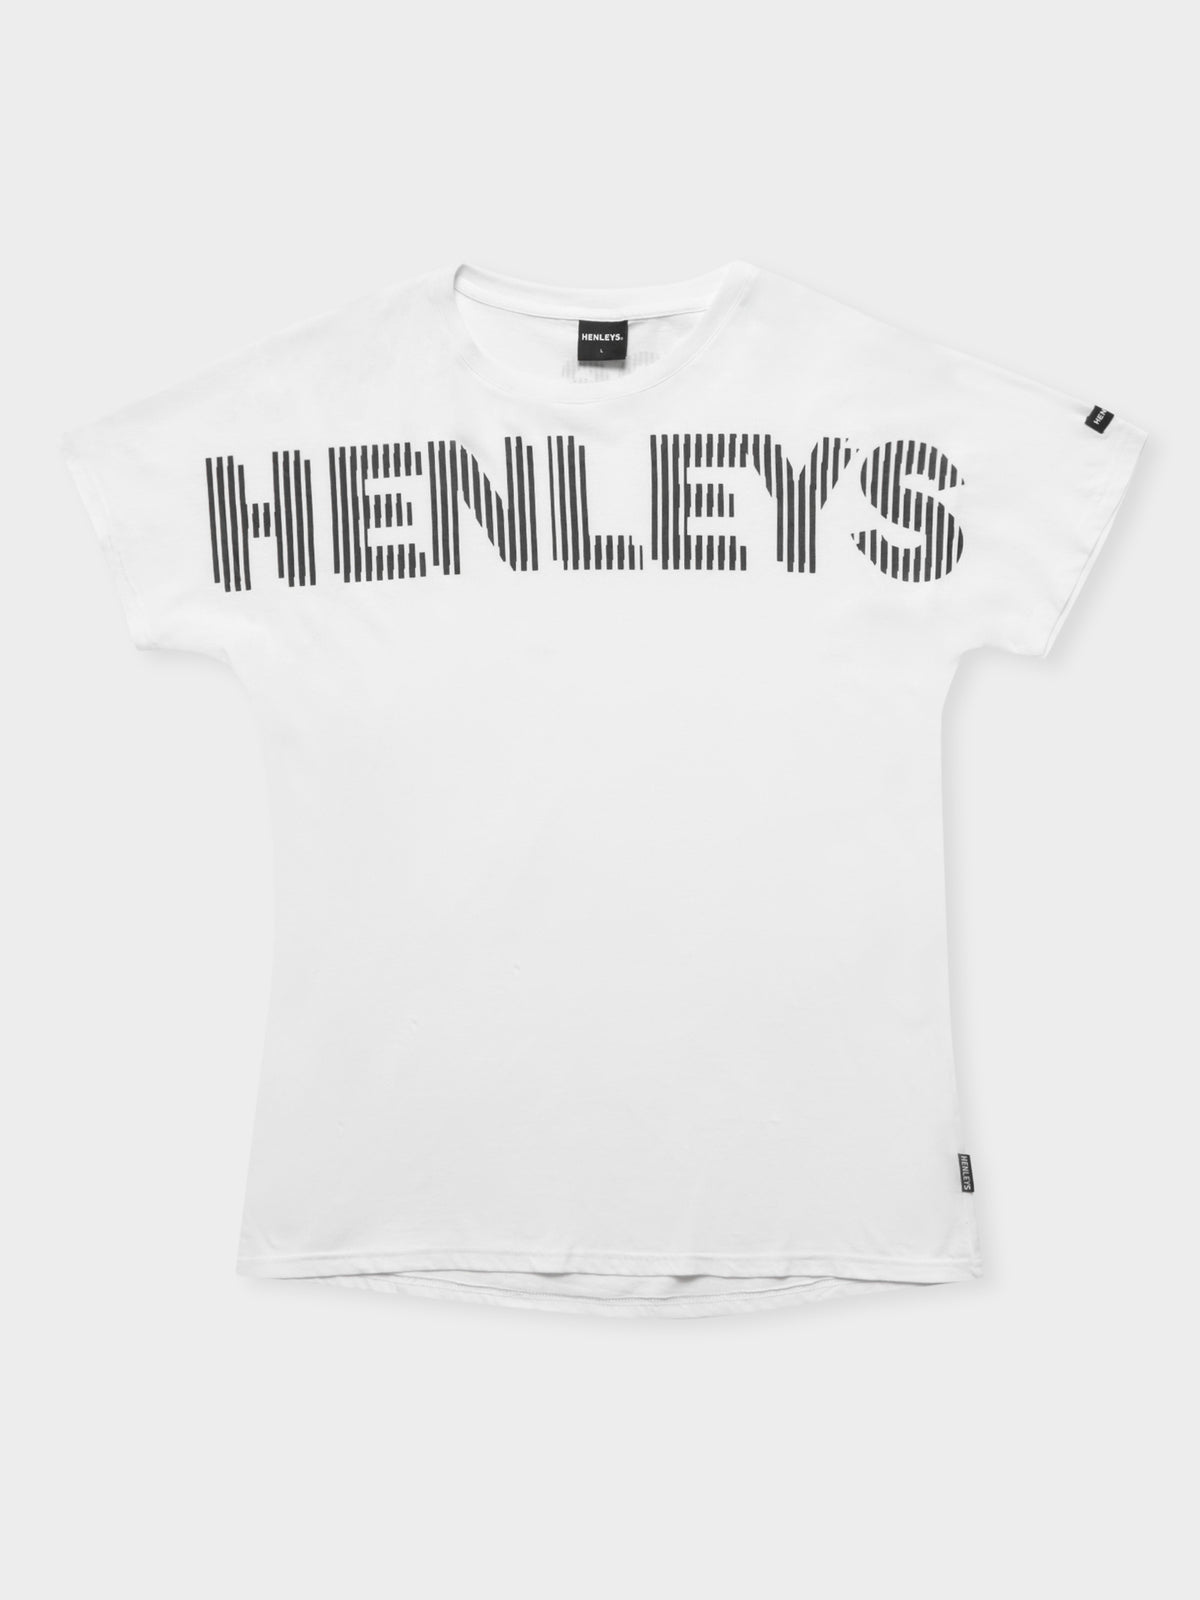 Reeves T-Shirt in White